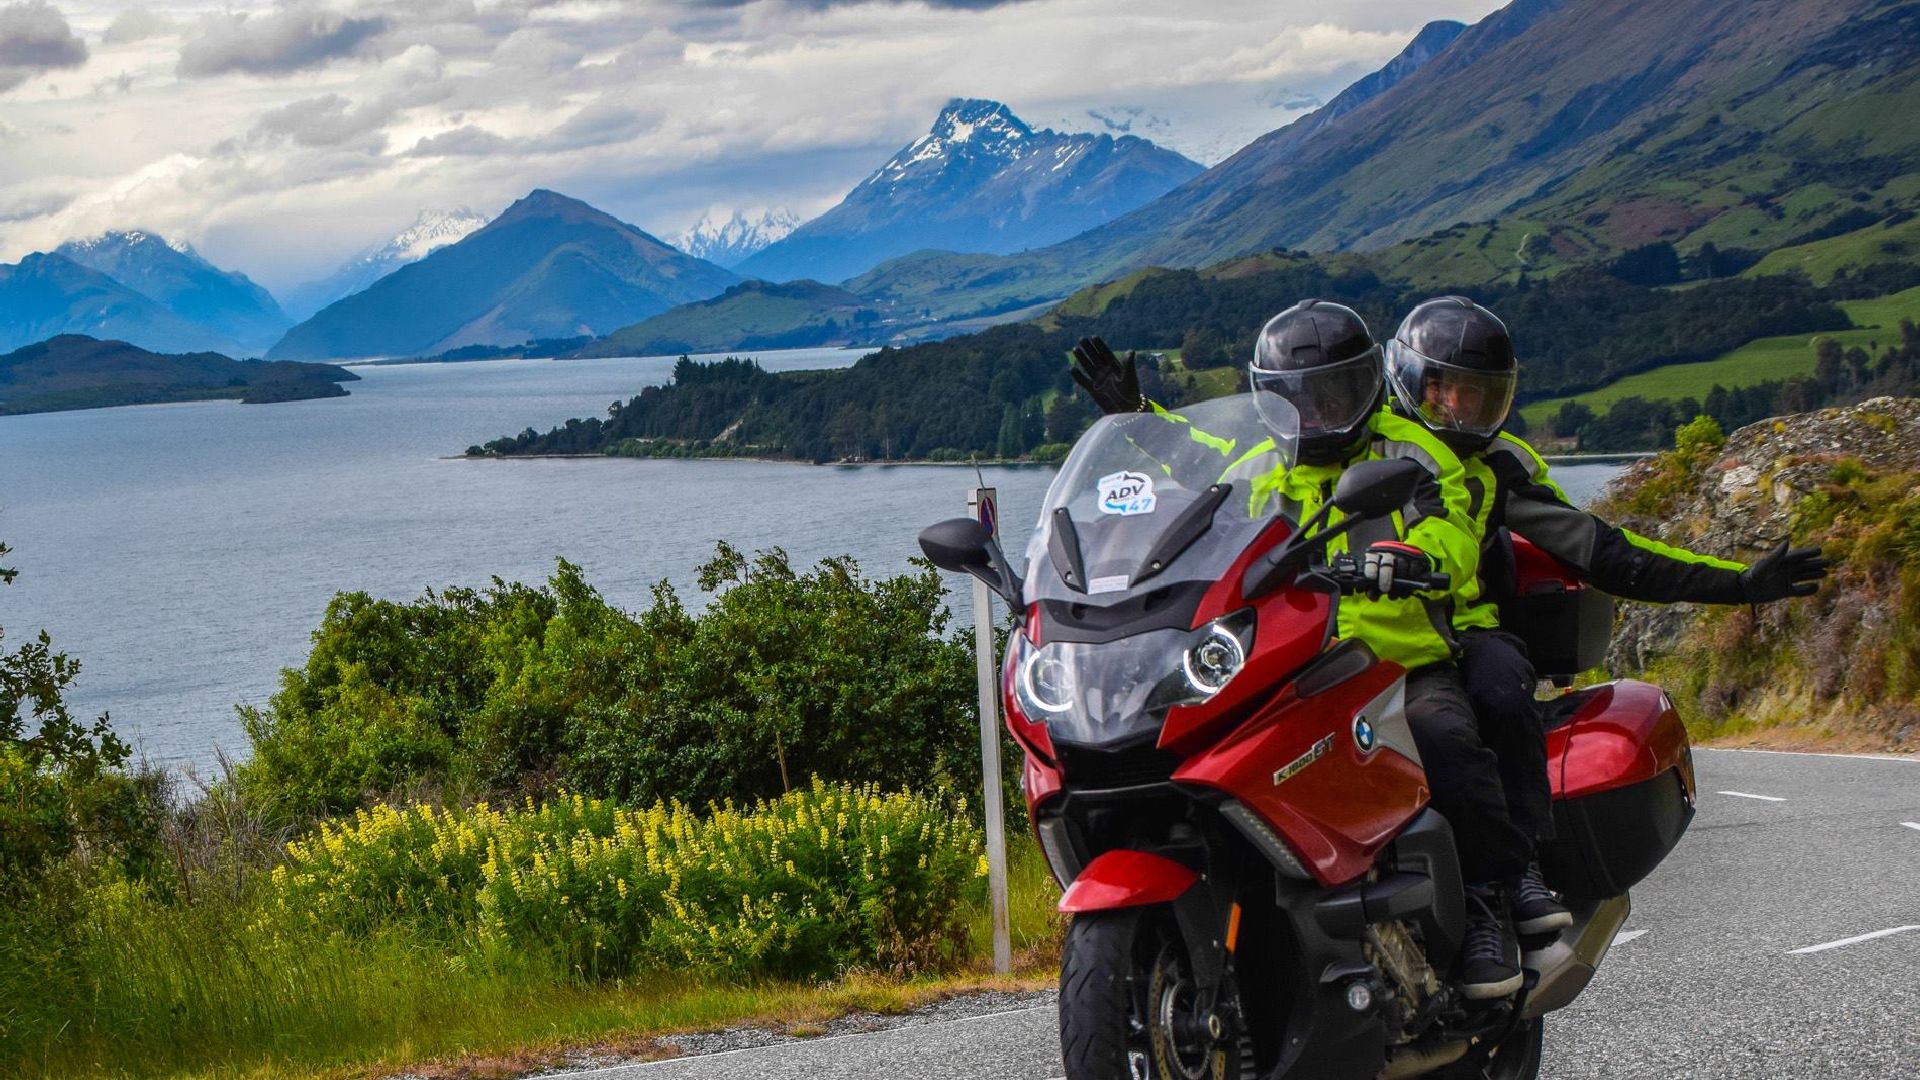 11 Day New Zealand South Island Motorbike Self-Guided Tour